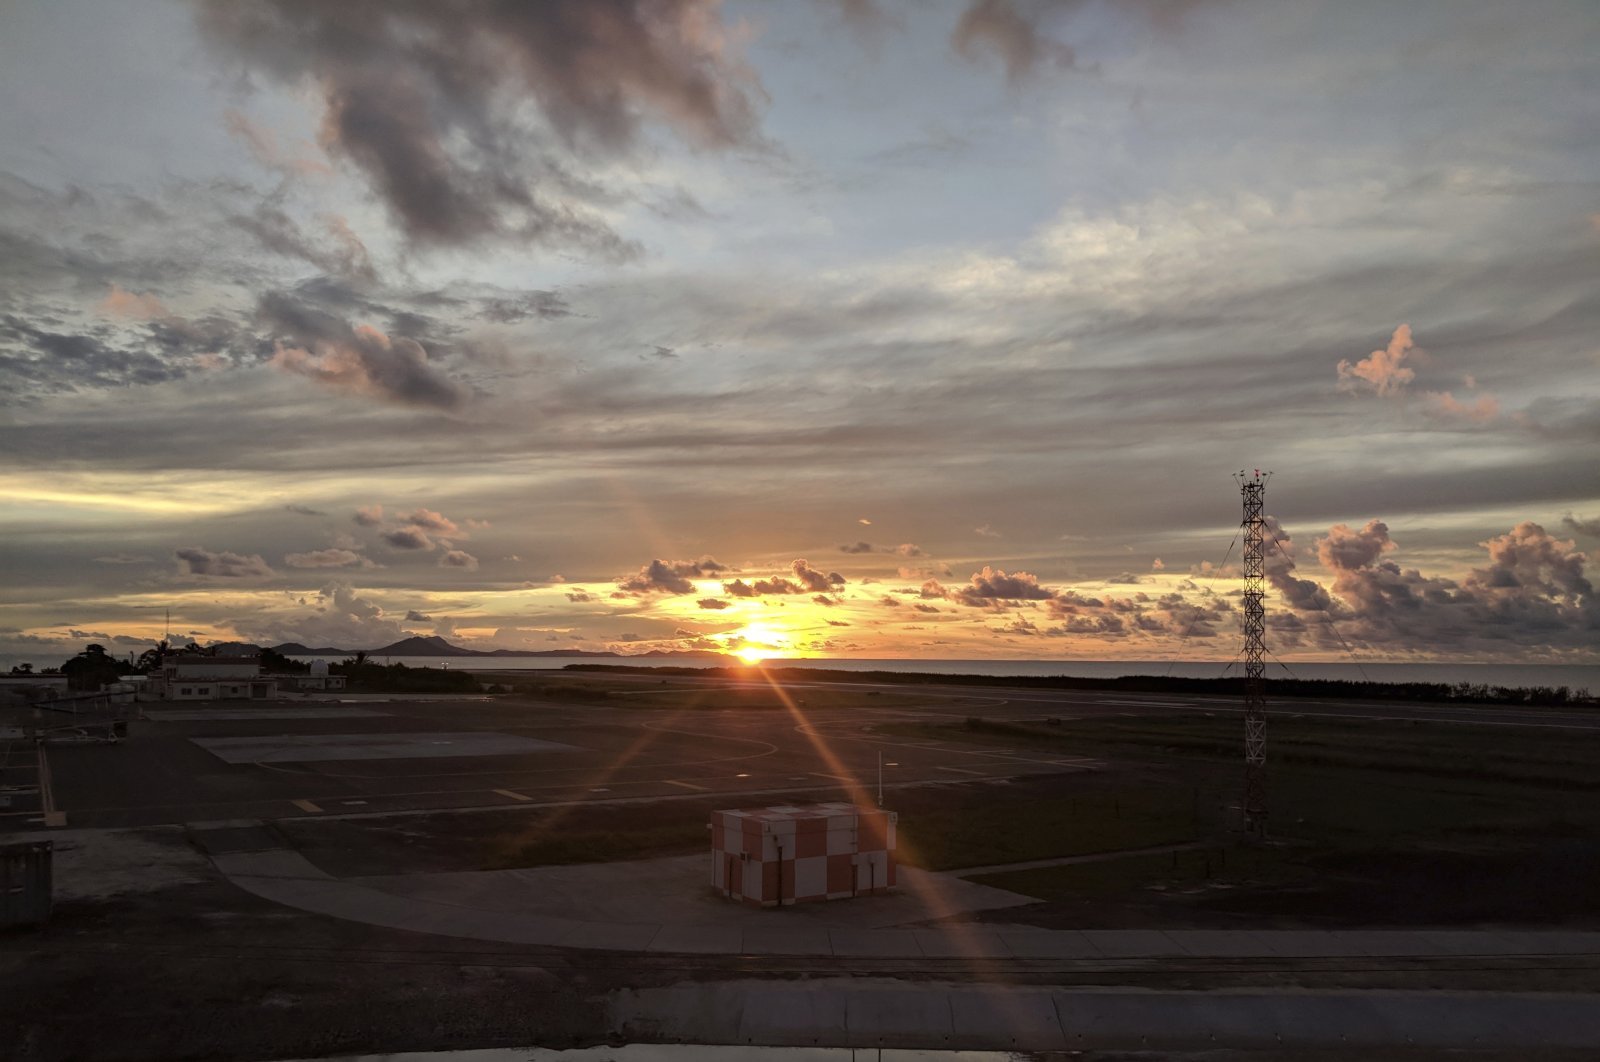 The sun sets over the runway at the Chuuk Airport in Weno, Federated States of Micronesia, Oct. 28, 2017. (AP Photo)